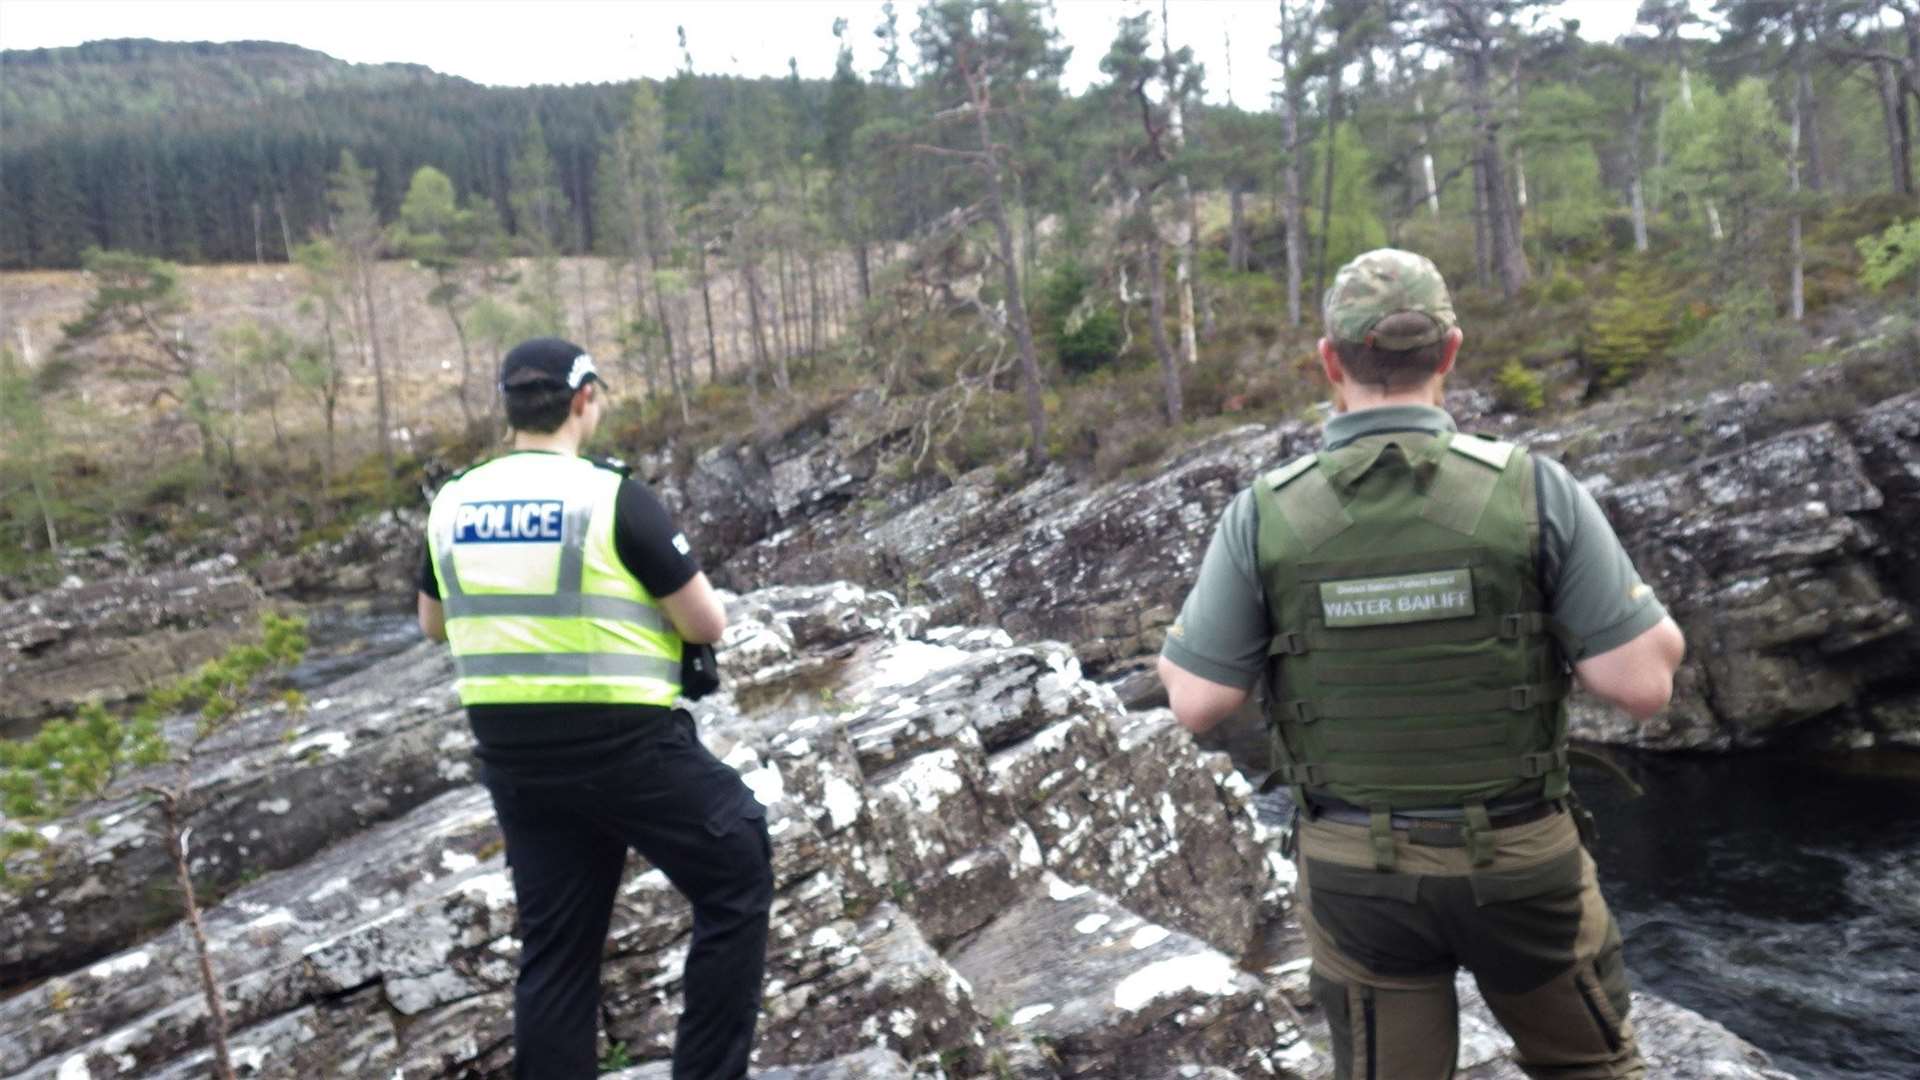 Police on wildlife patrols throughout the Highlands.